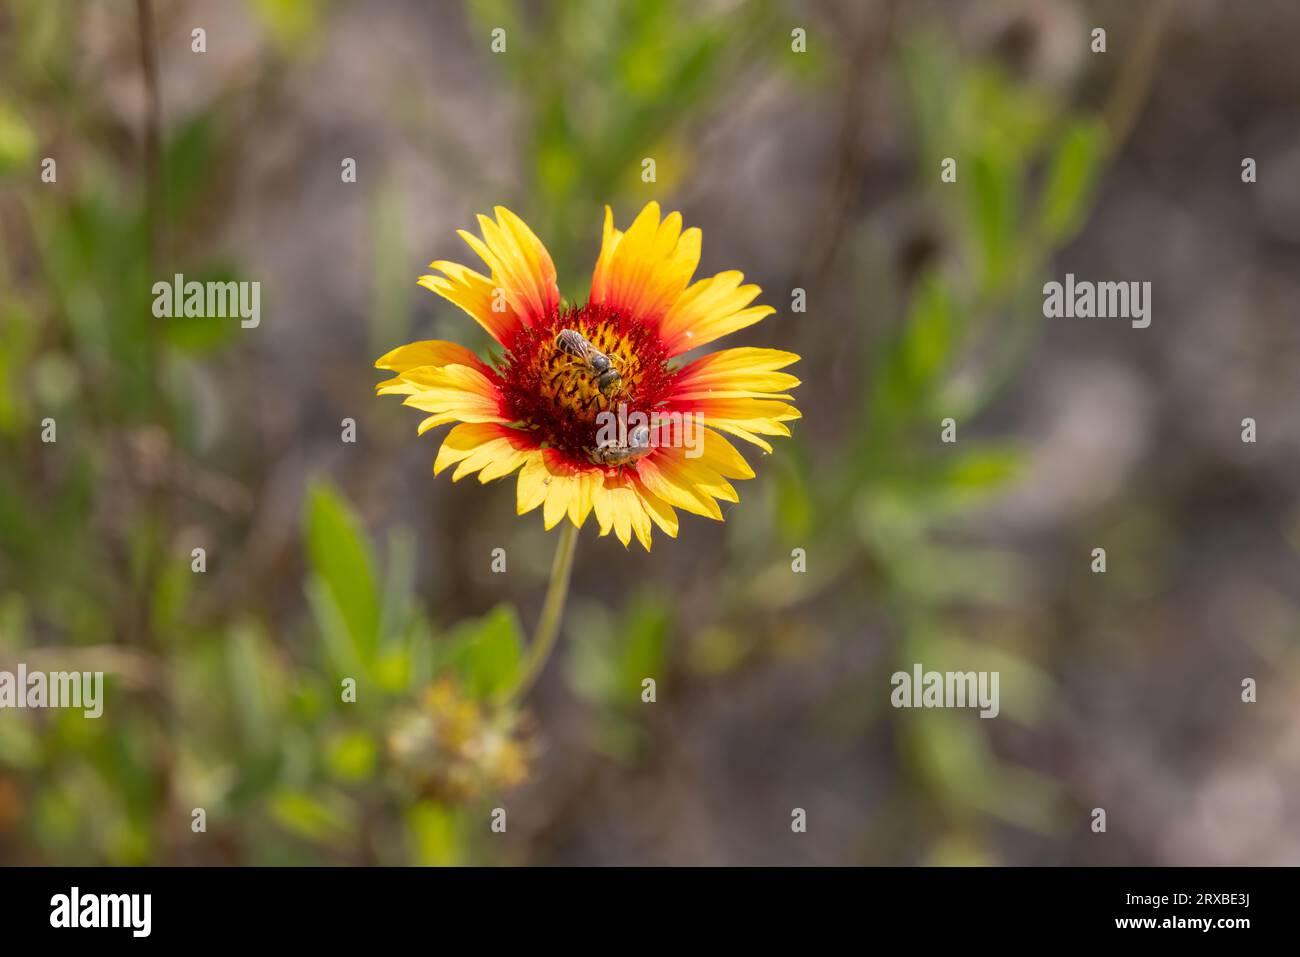 Two bees on a red and yellow flower blossom. Stock Photo